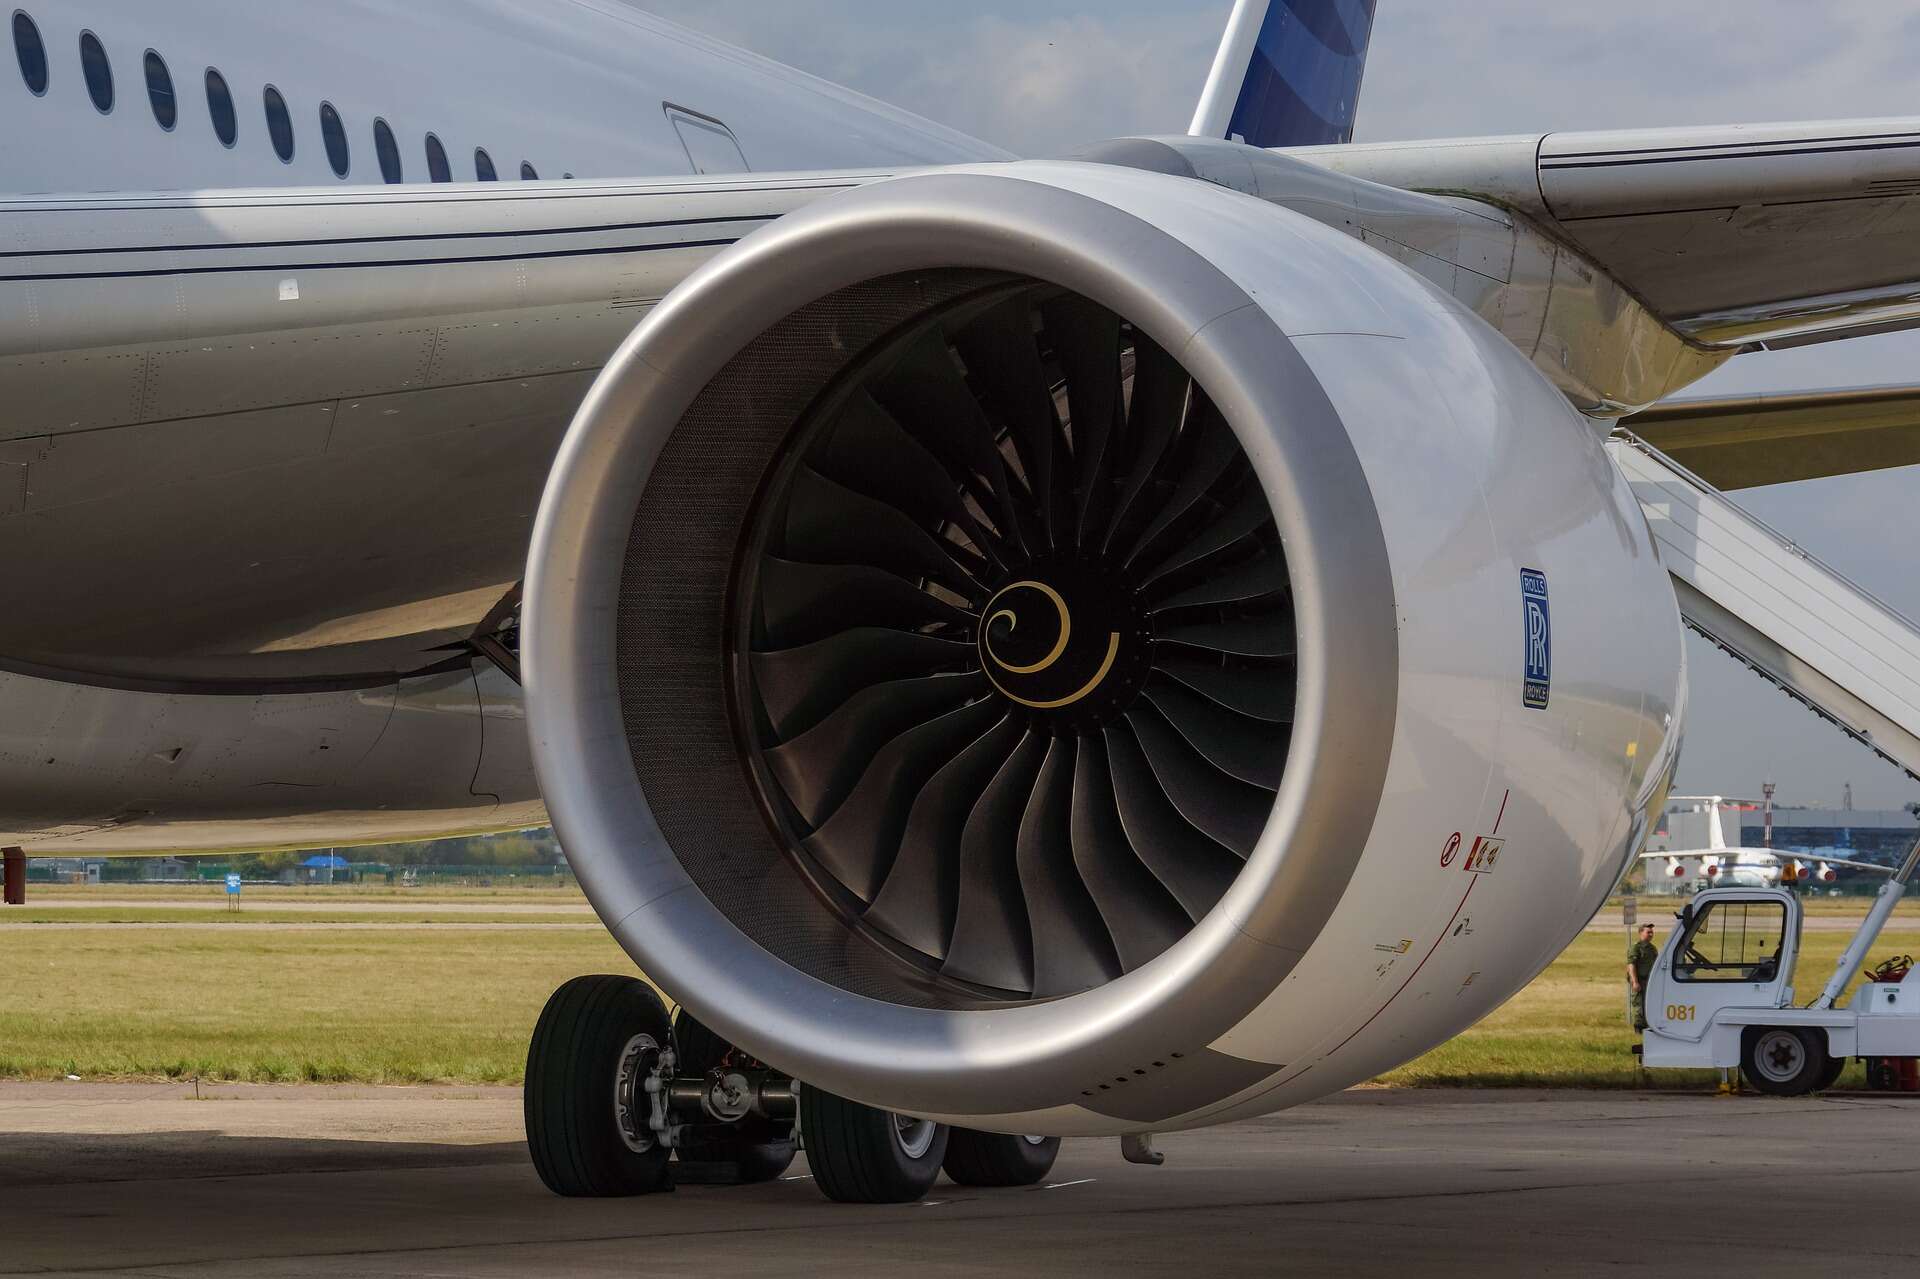 "Partner with Us on New Technology" says Rolls Royce as it Posts Massive £5.4 Billion Losses